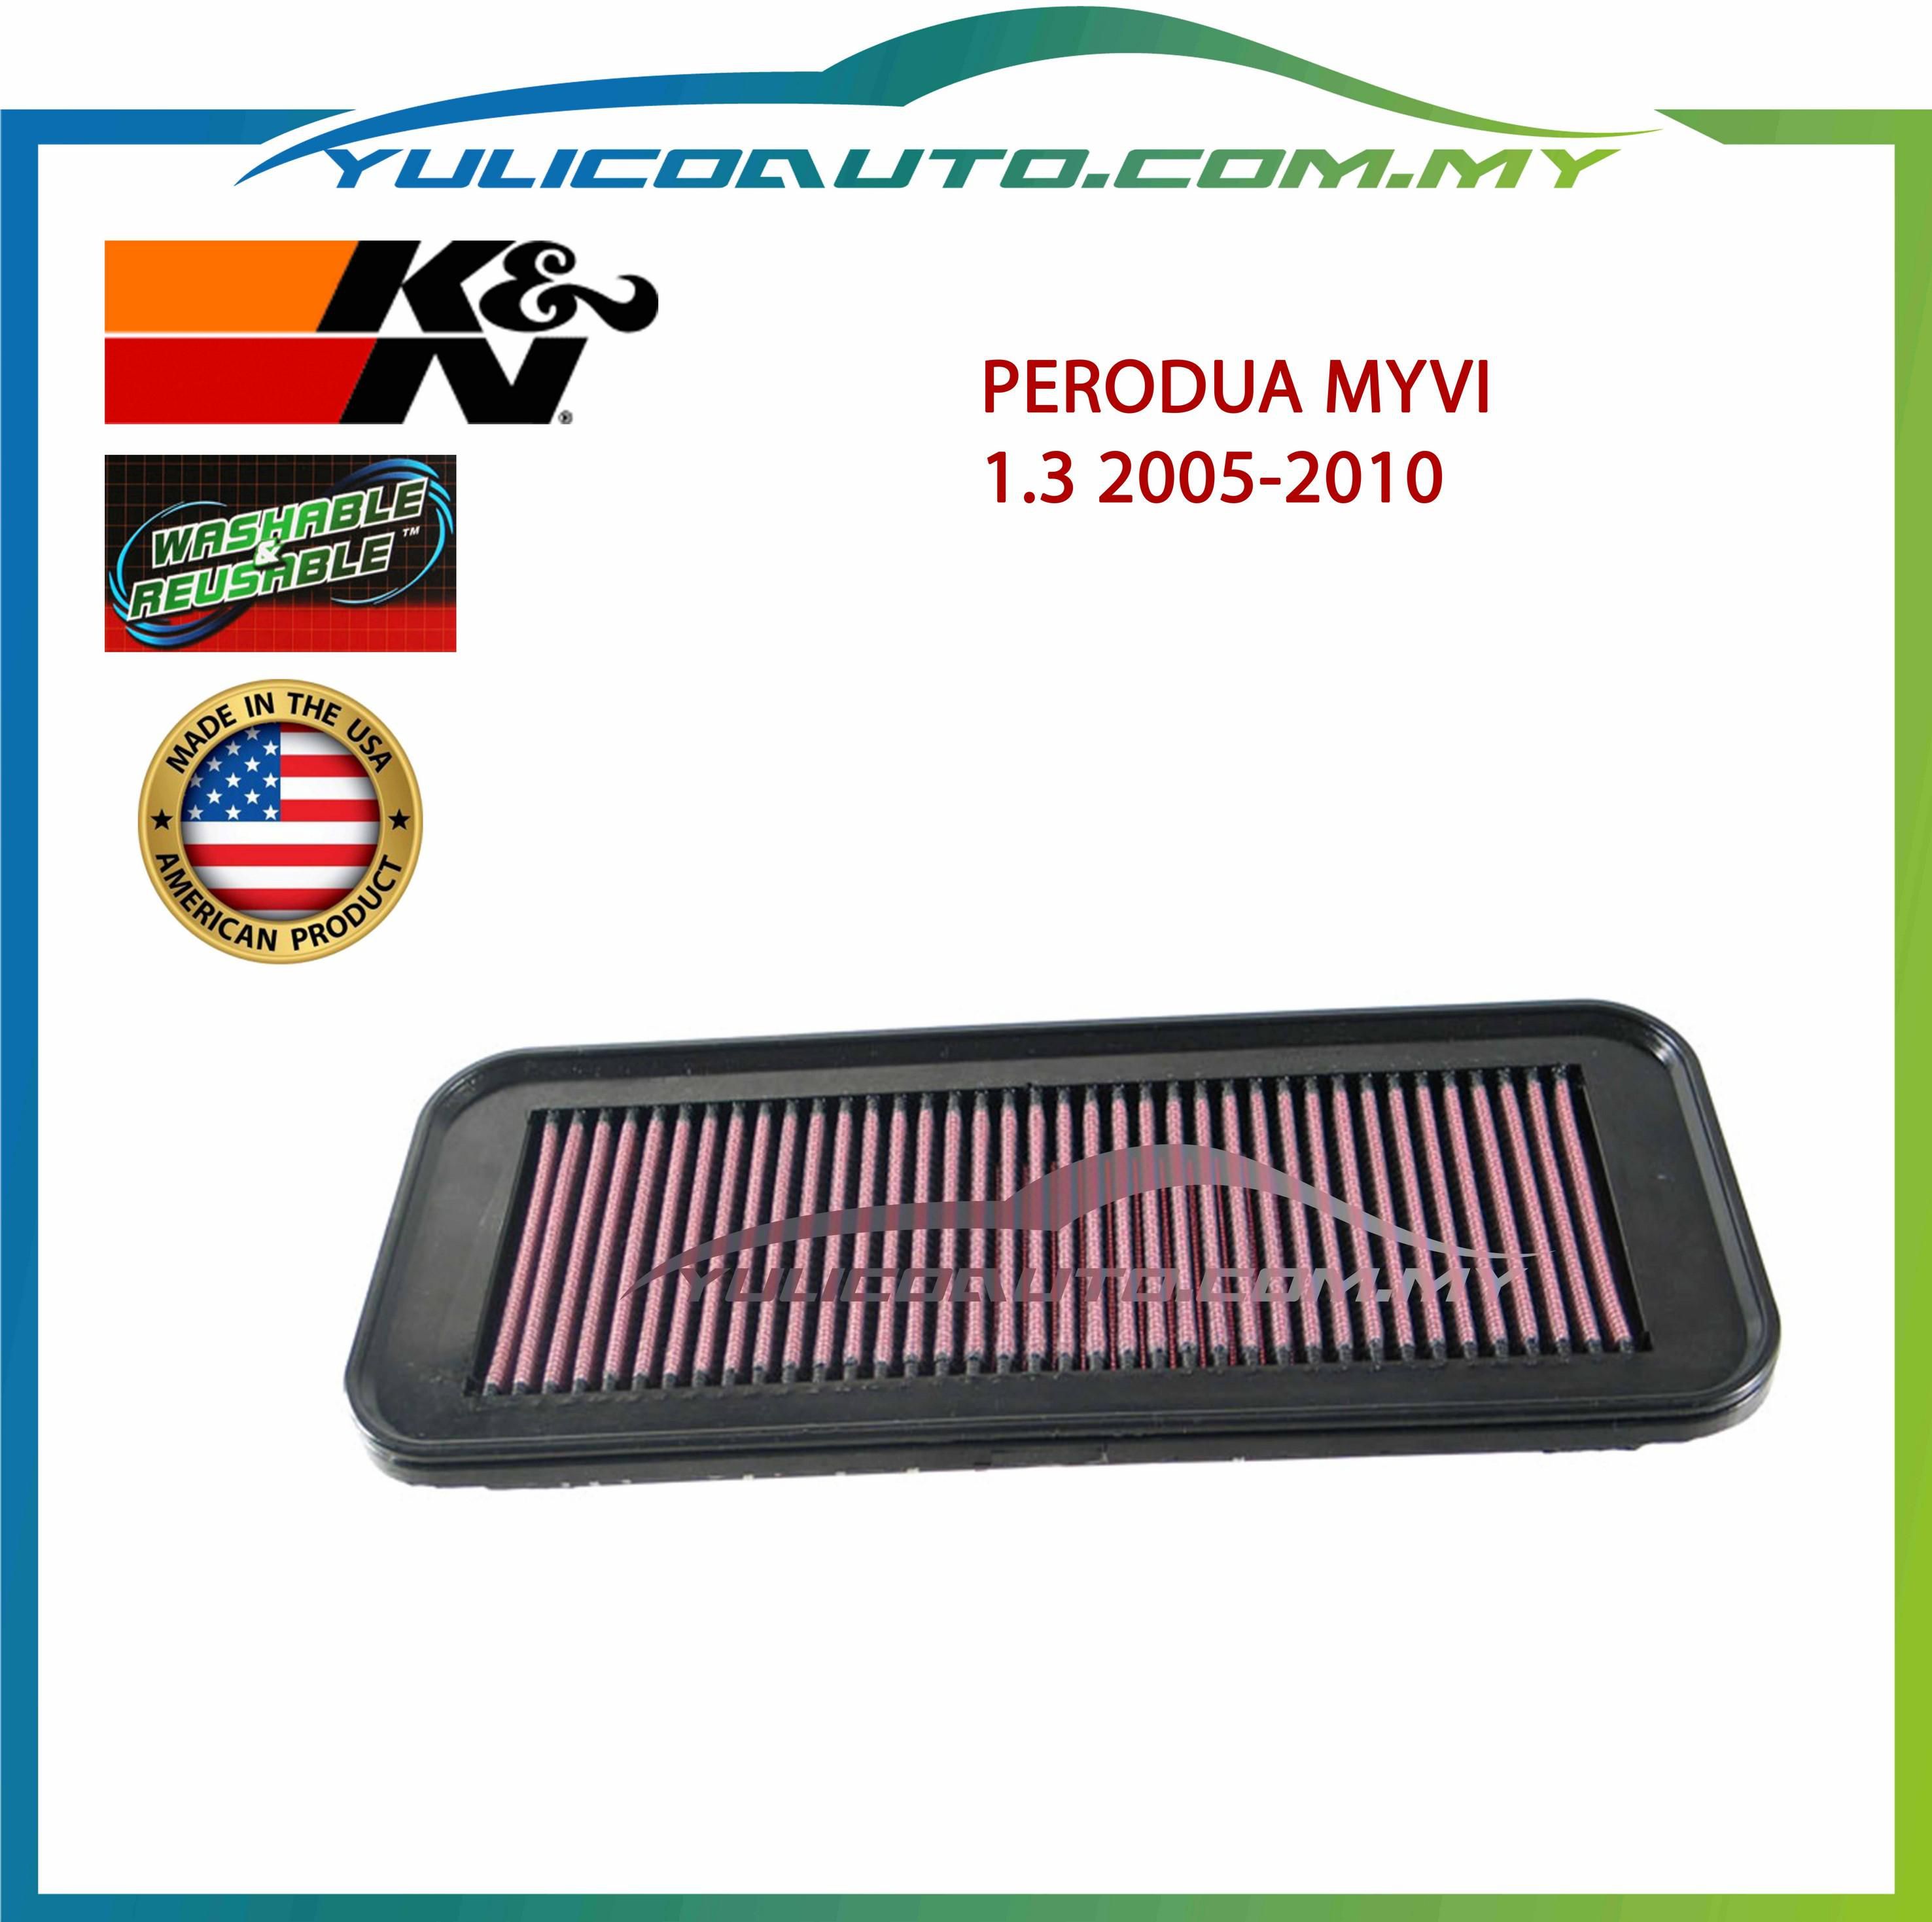 K&amp;N High Performance Washable Air Filter for Perodua Myvi 1.3/1.5 Year 2005 - 2016